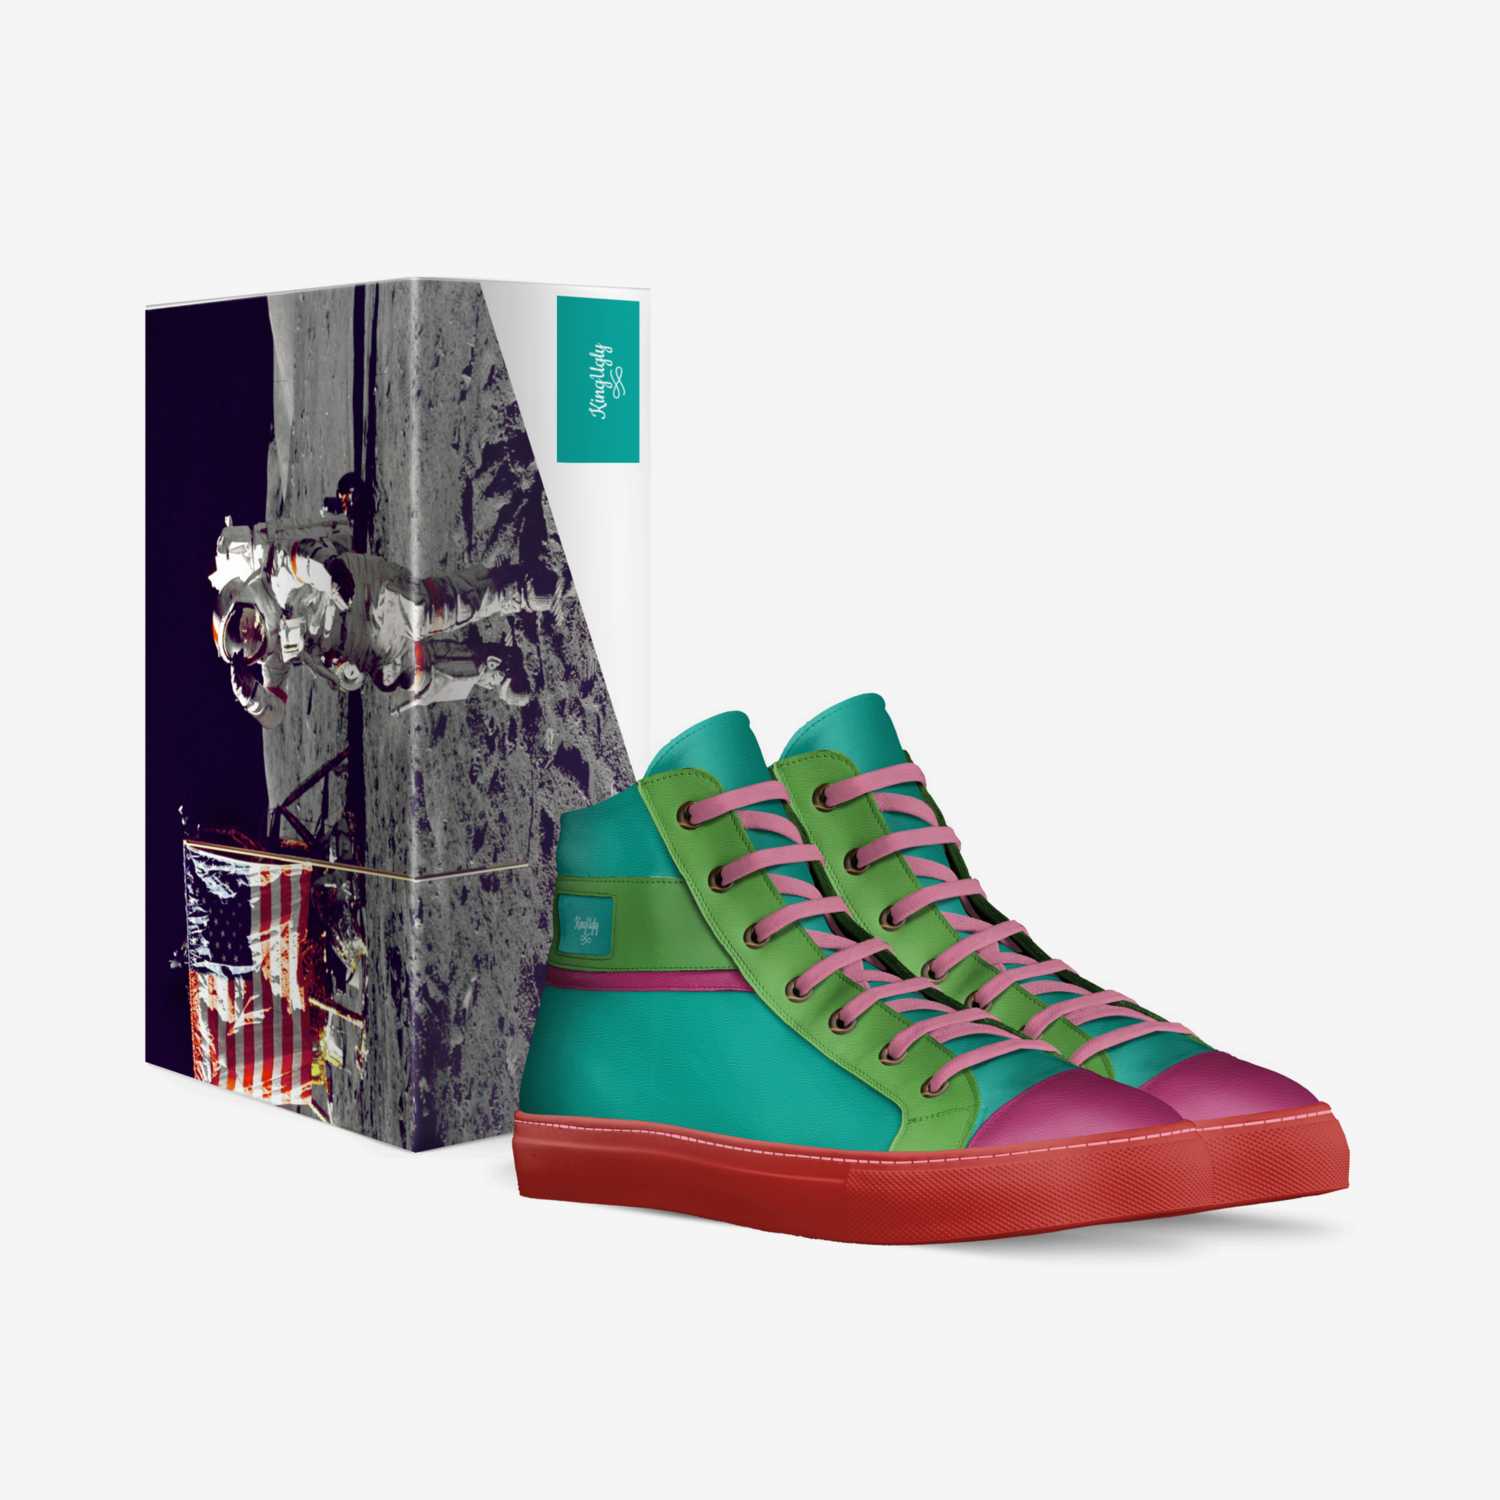 KingUgly custom made in Italy shoes by Christopher Young | Box view